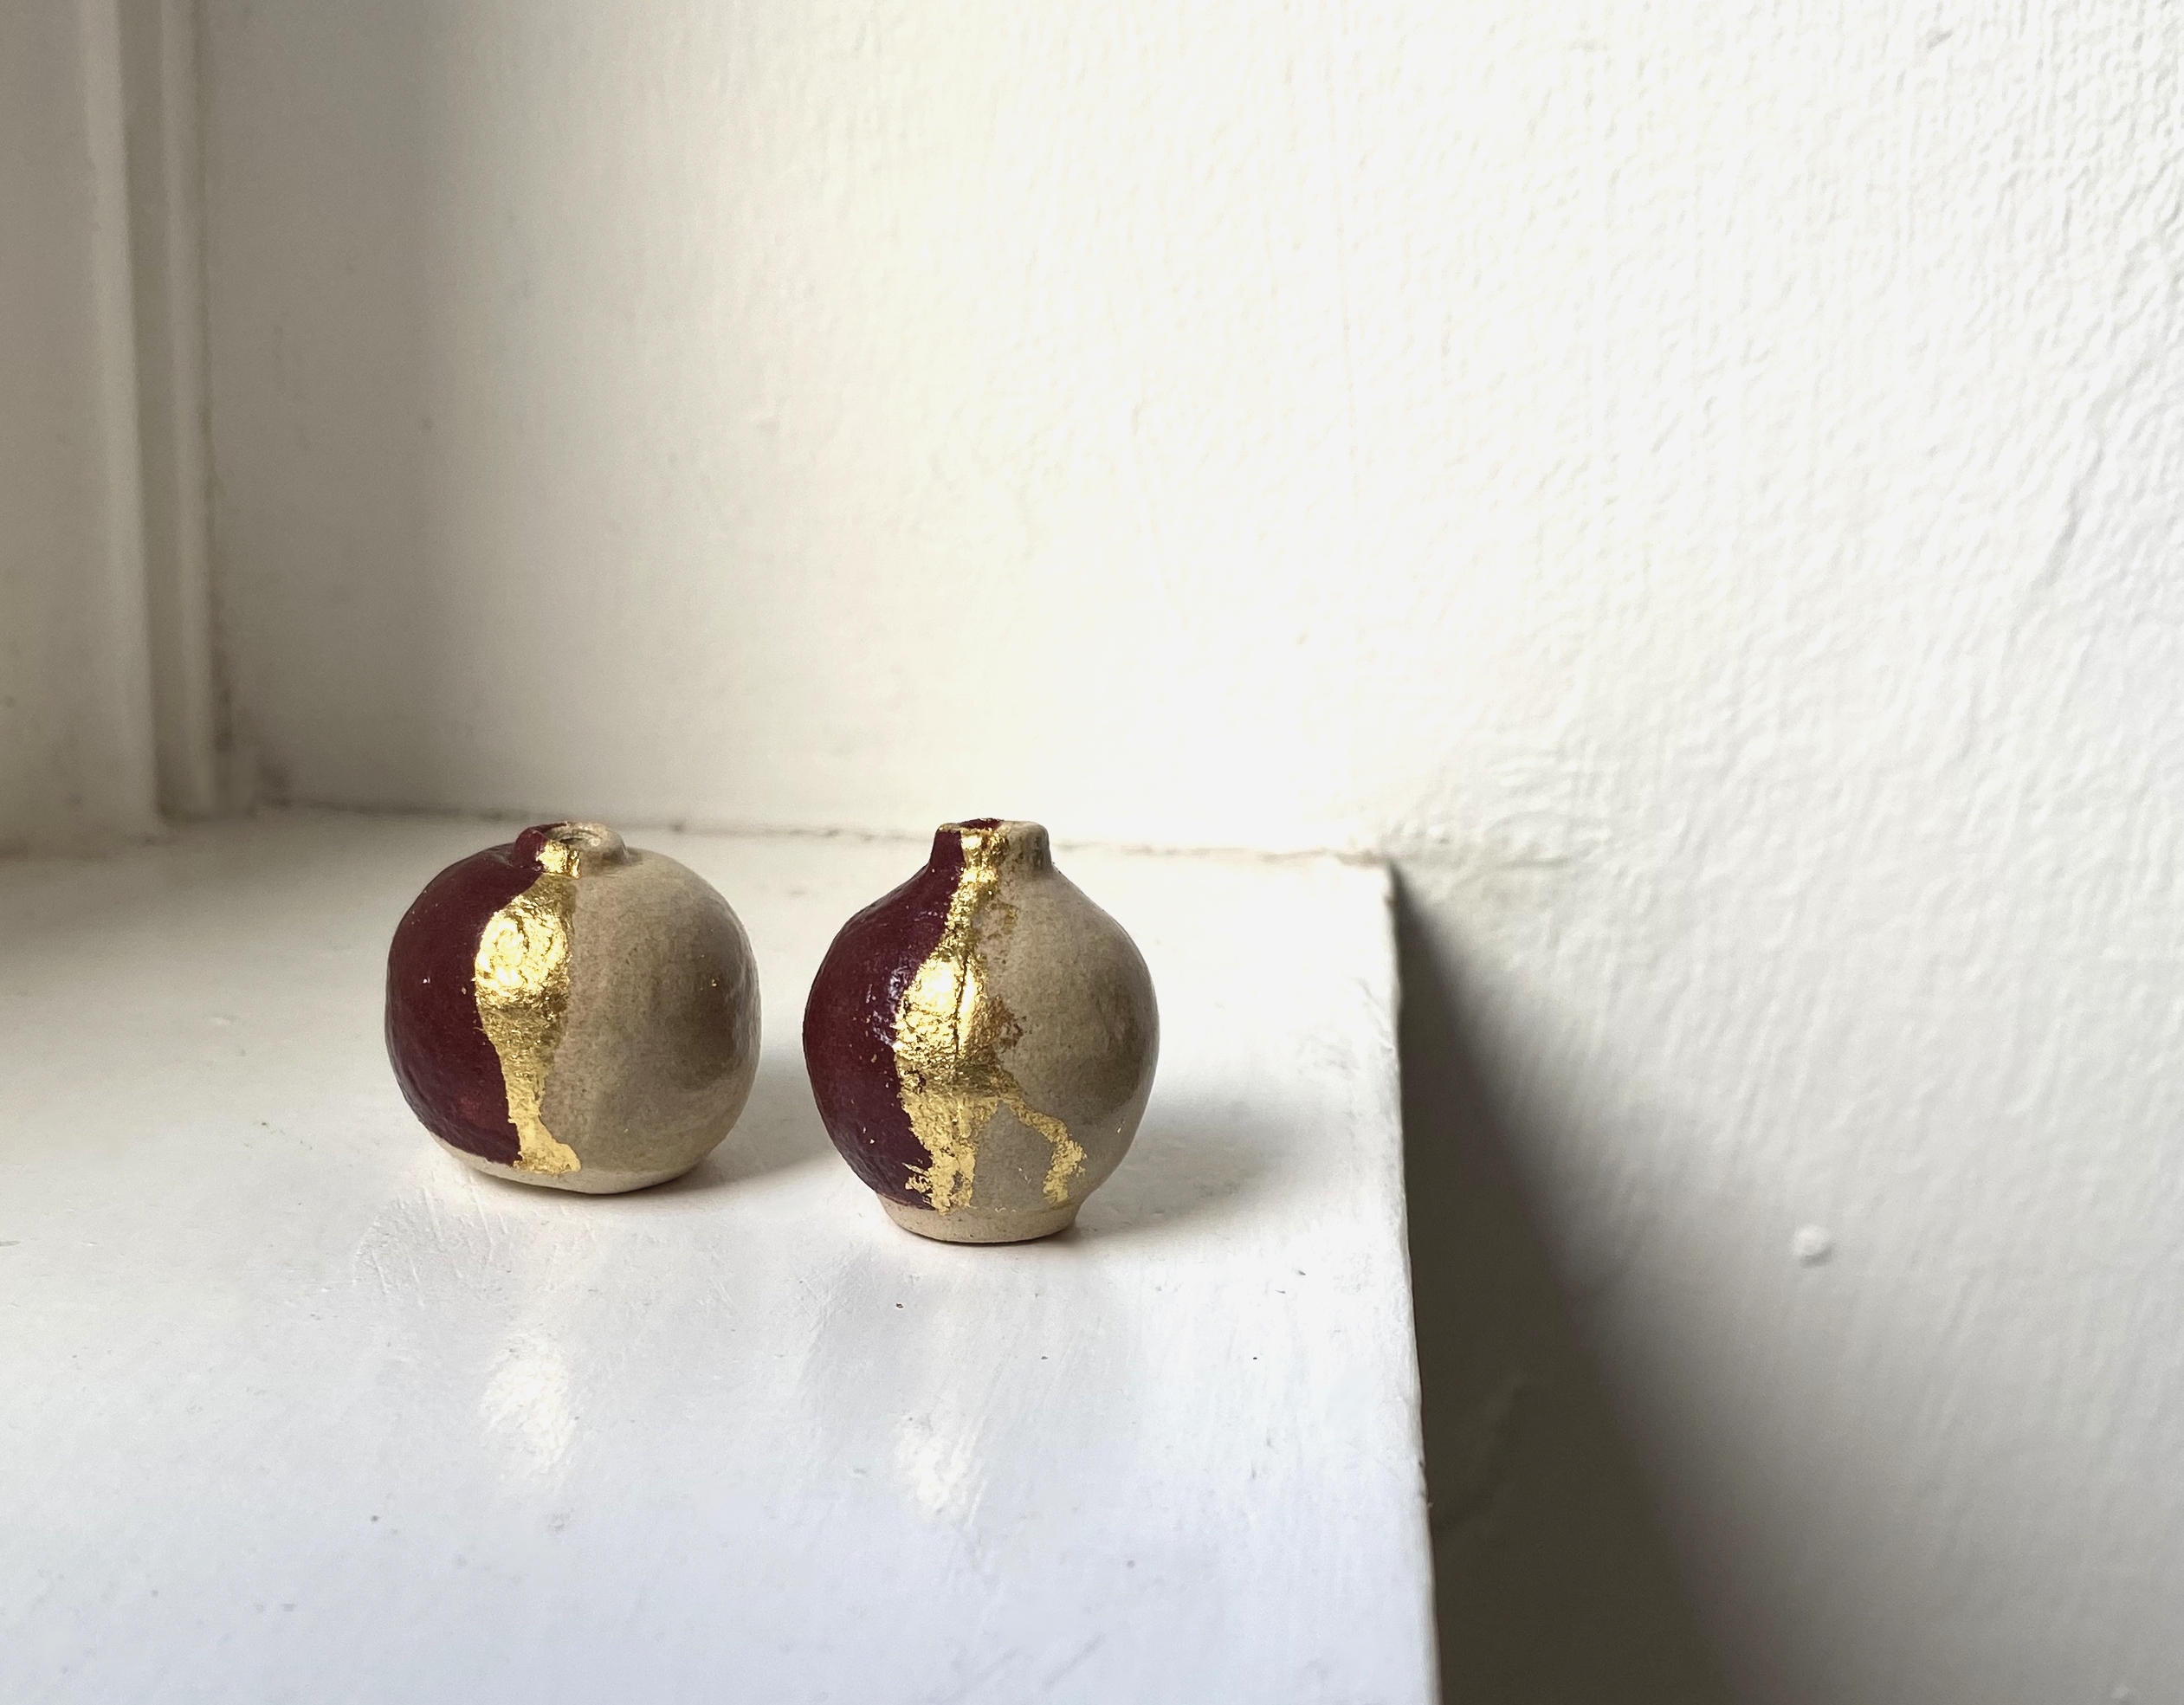 Gilded autumn duo-tone miniature vases, with 24 carat gold leaf detail.